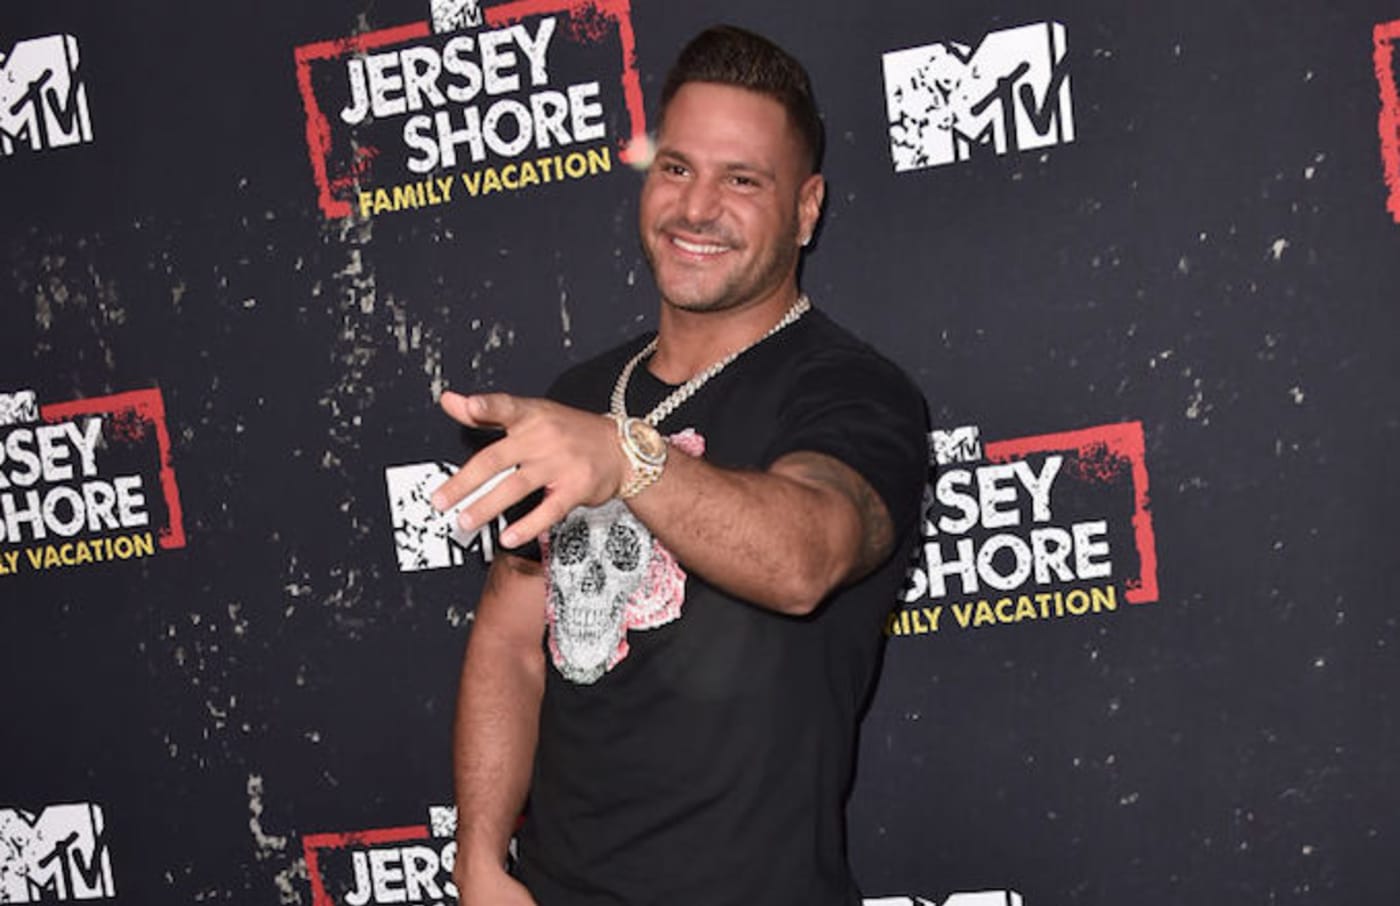 Ronnie Jersey Shore